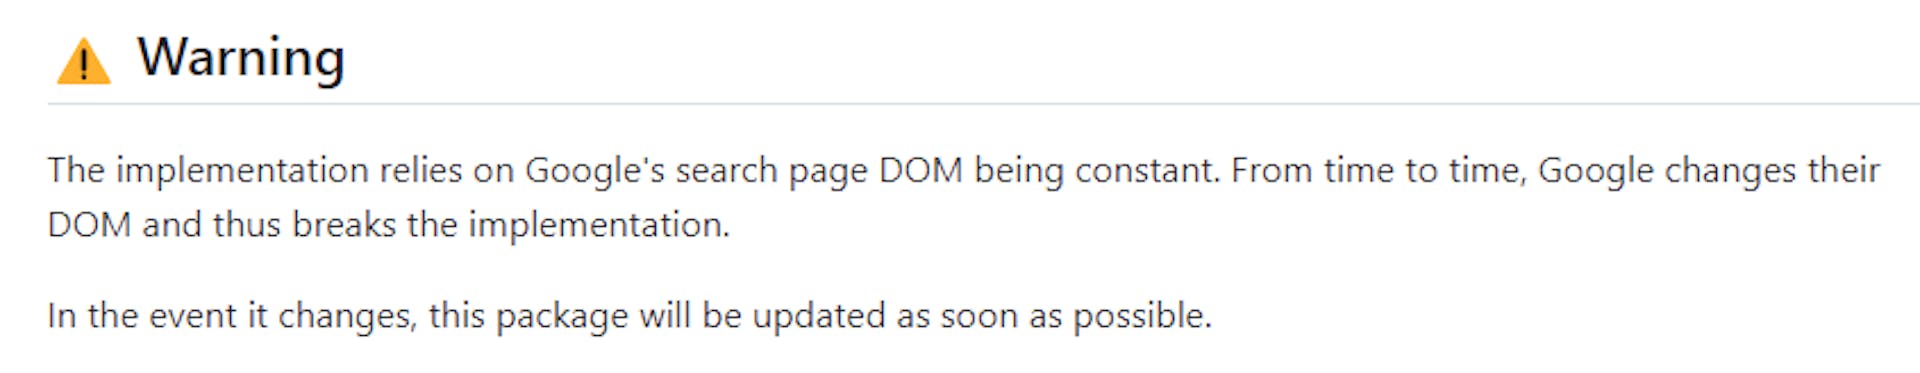 Google's DOM changes frequently, so the parser needs to be tweaked constantly...